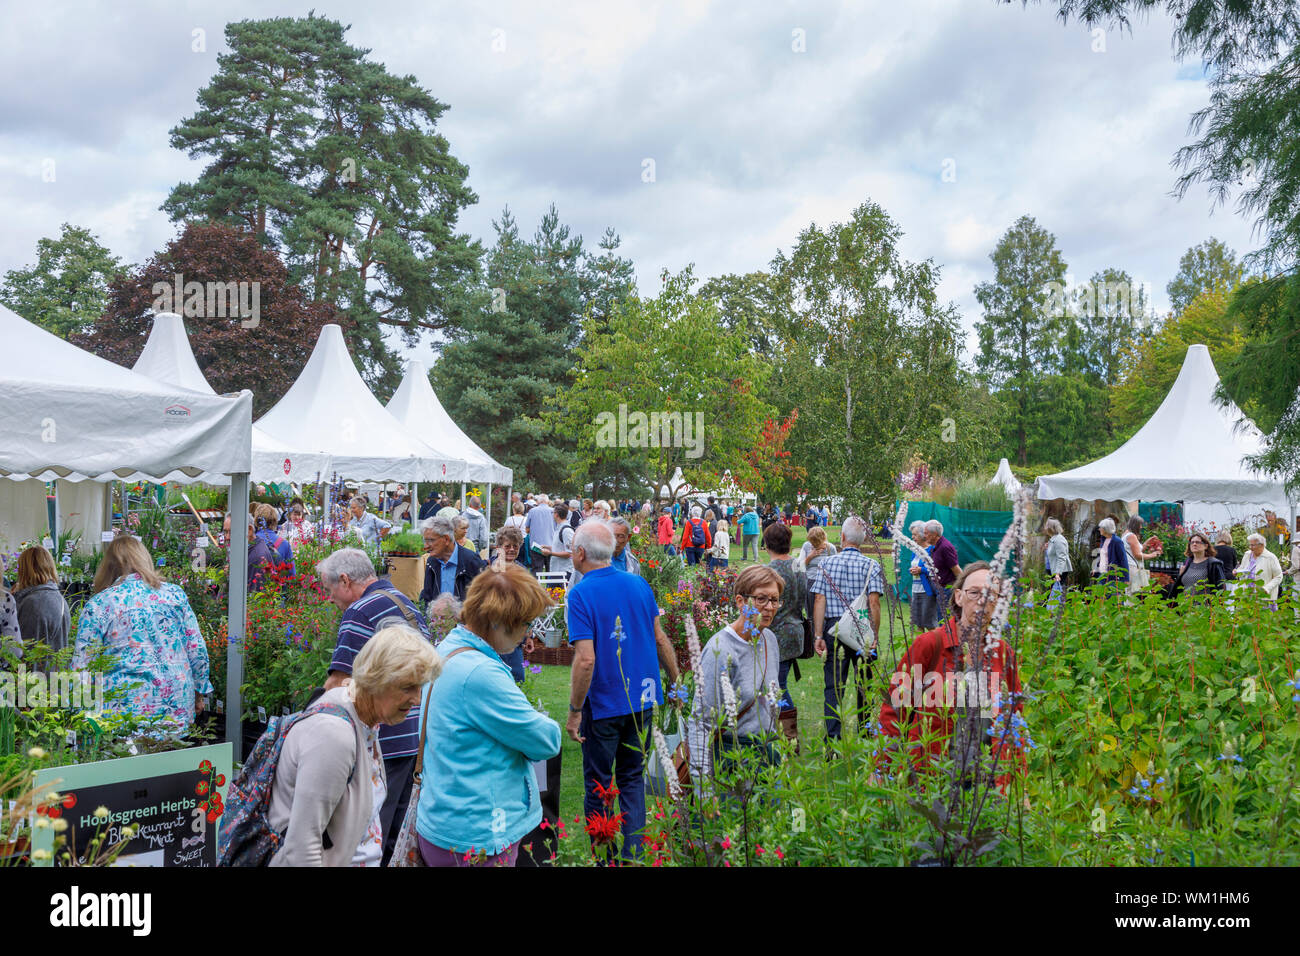 Stalls and flowers at the busy September 2019 Wisley Garden Flower Show at RHS Garden Wisley, Surrey, south-east England Stock Photo